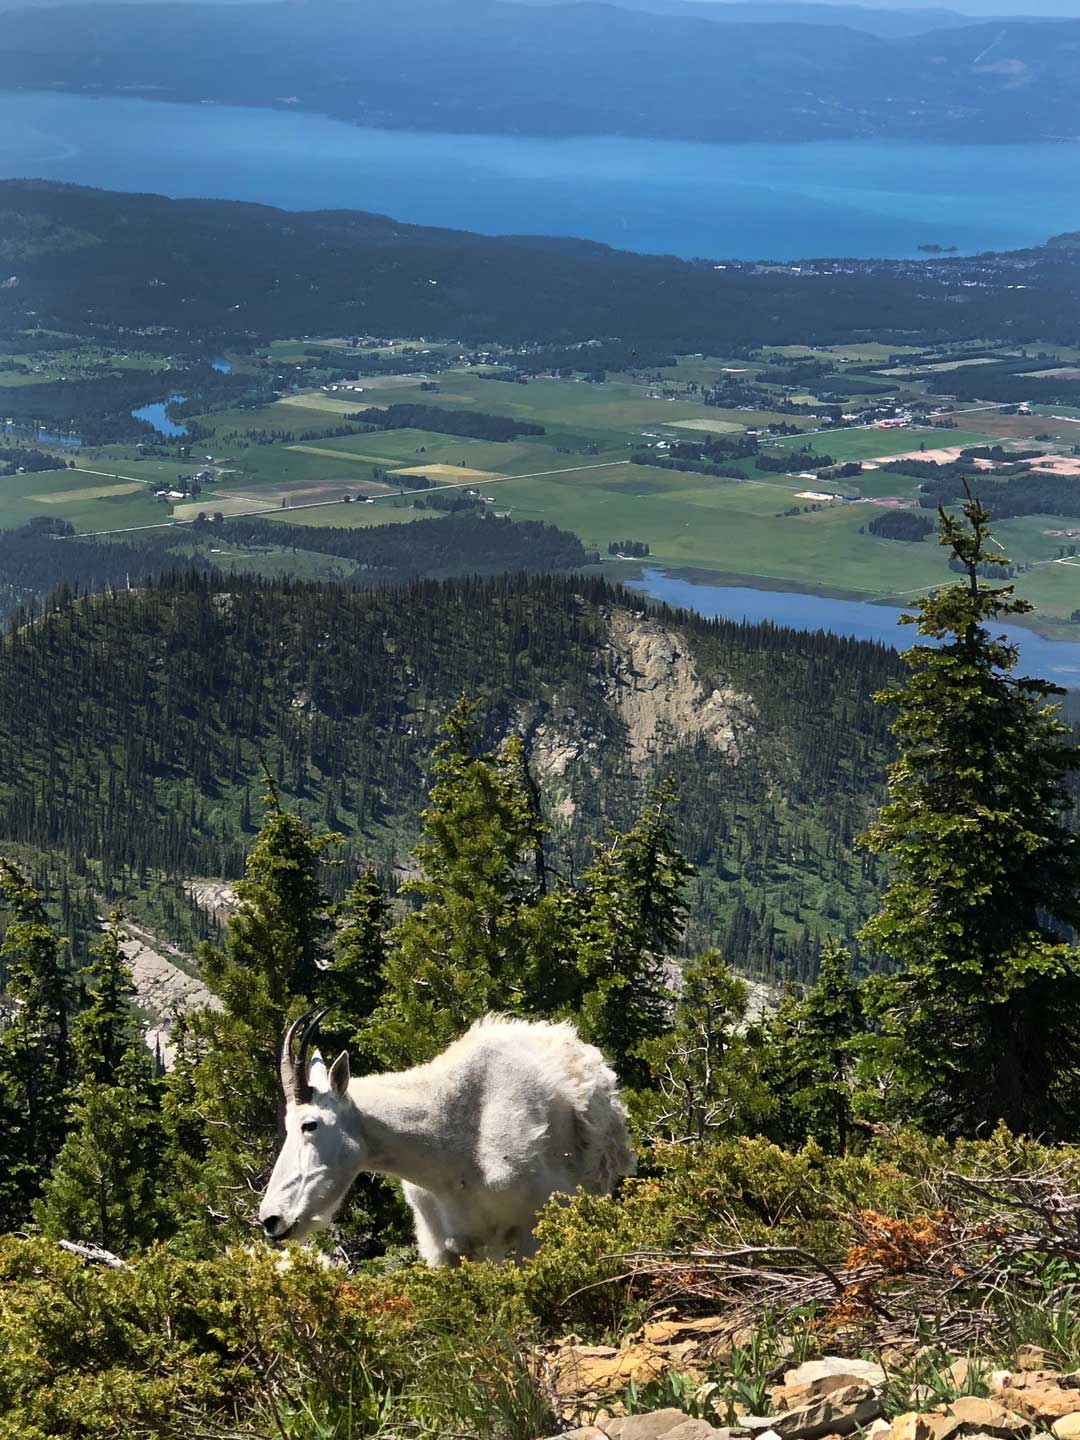 A goat in Jewel Basin in the Flathead Valley